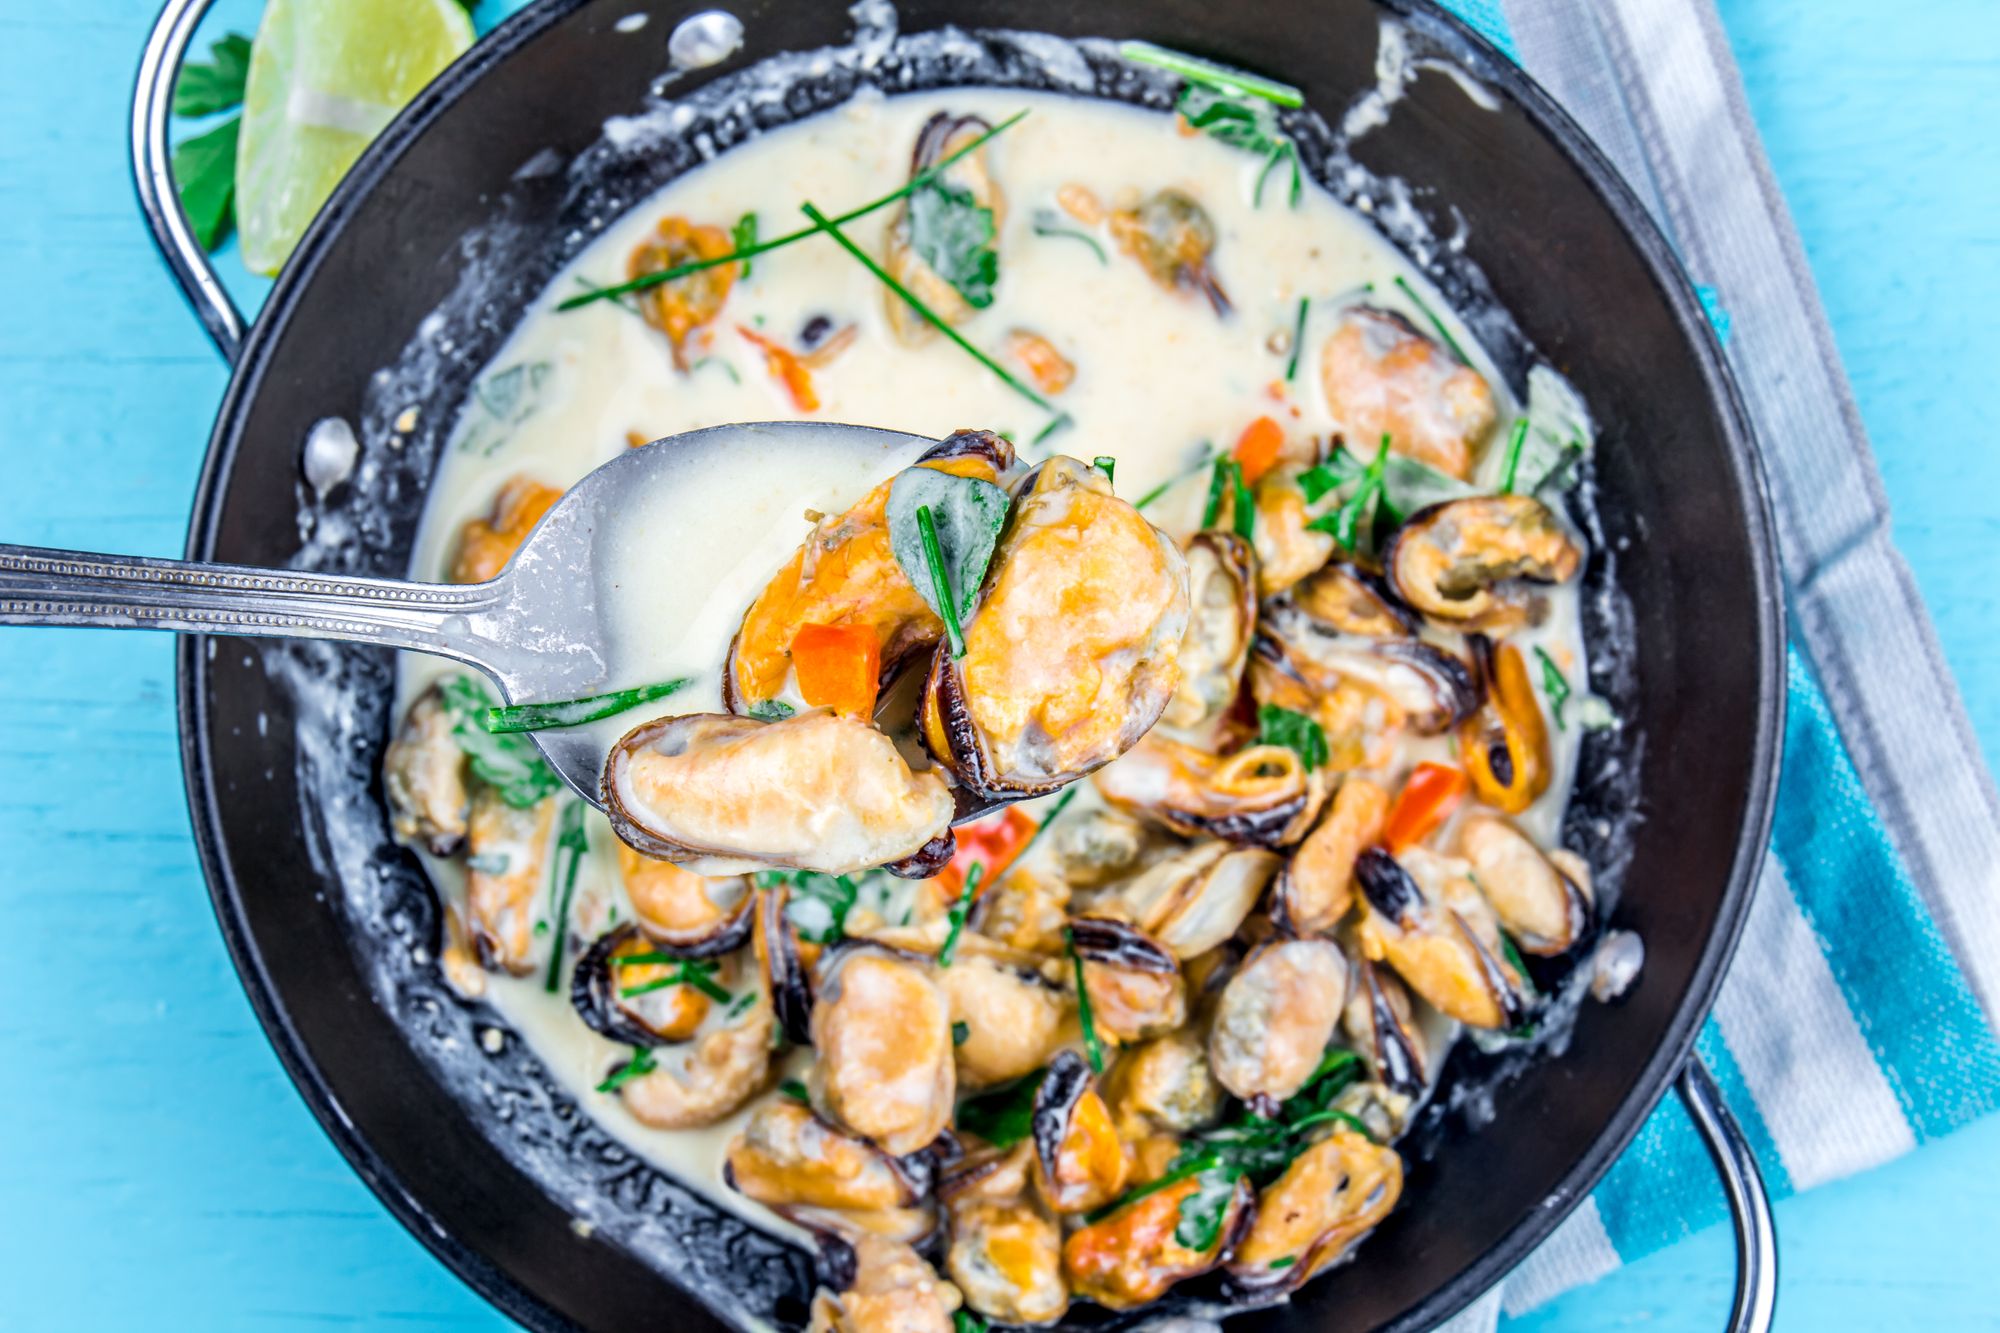 Creamy spiced mussels